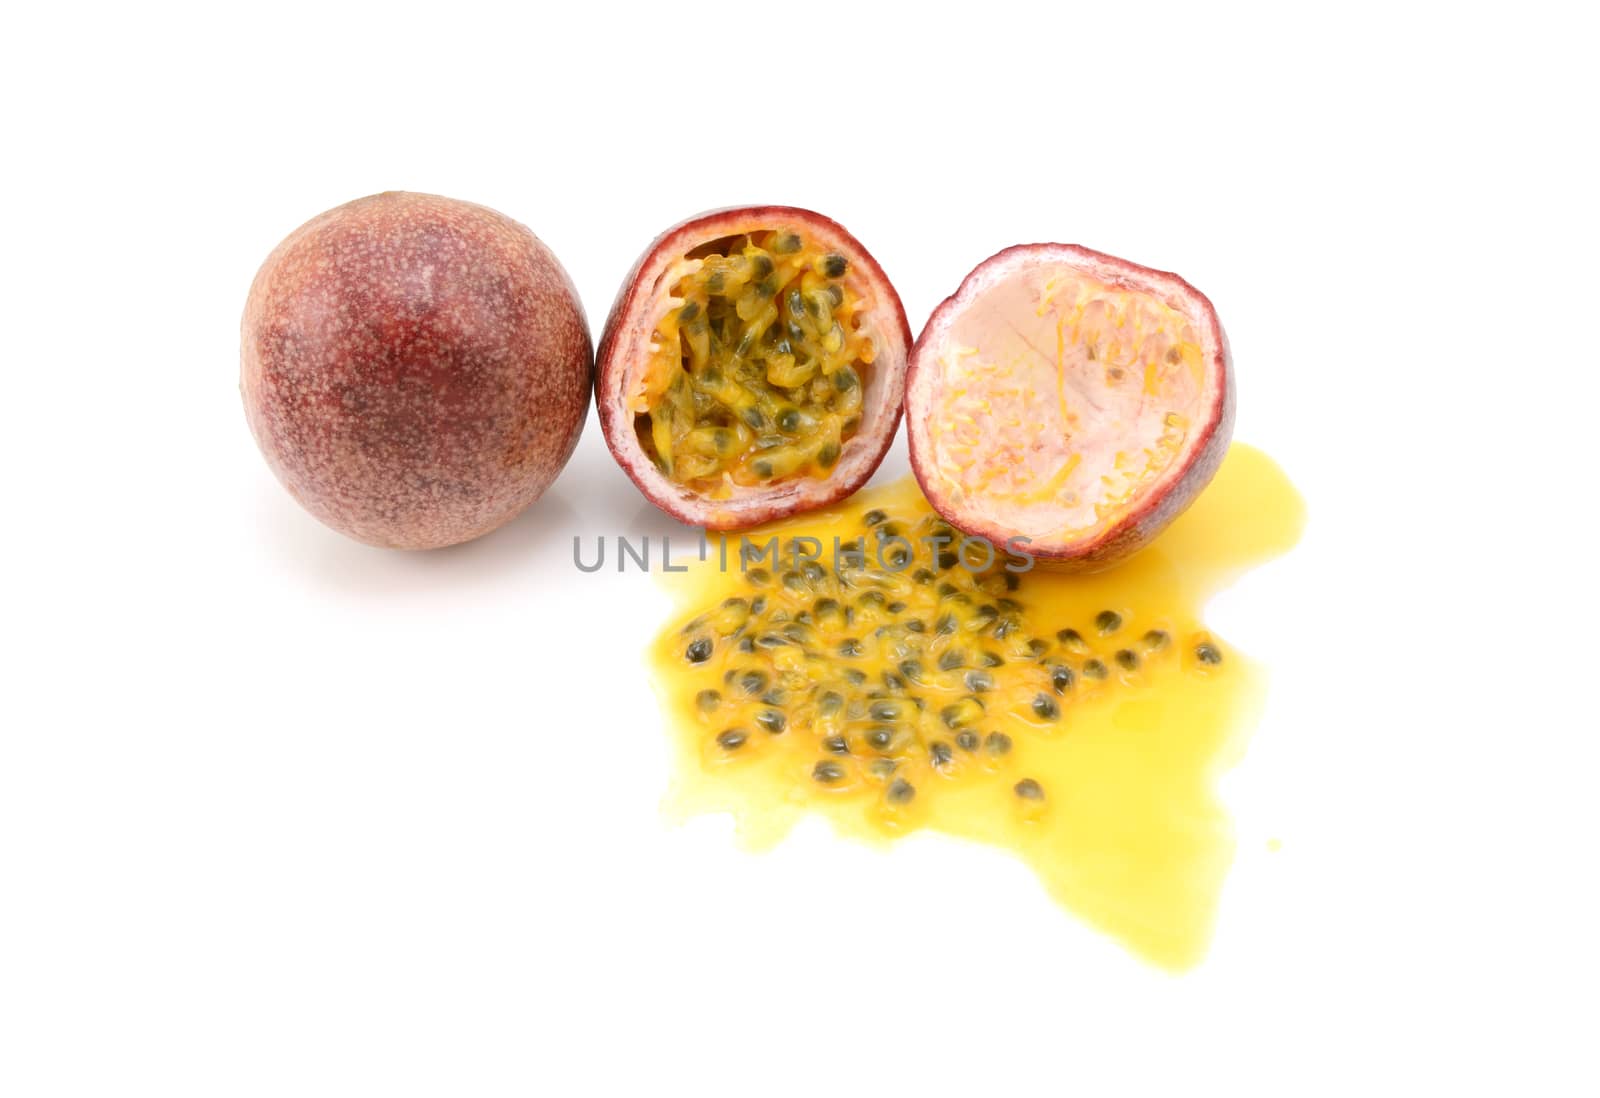 Whole and halved passion fruits with spilled juice and seeds by sarahdoow